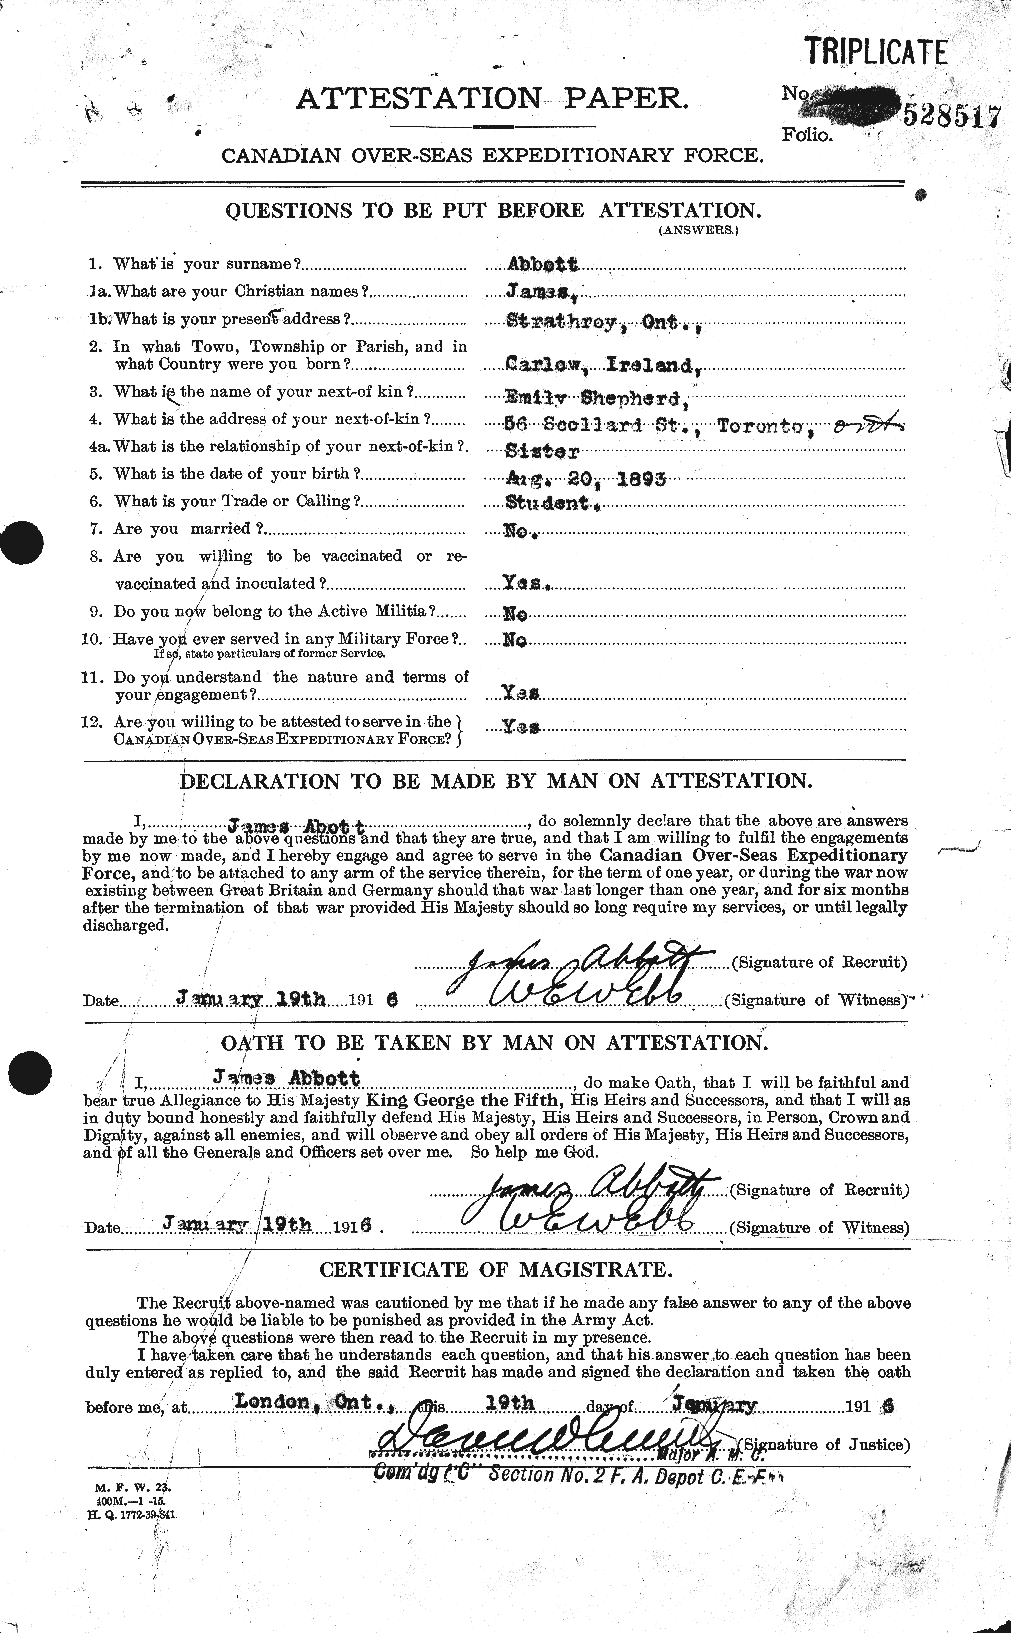 Personnel Records of the First World War - CEF 200977a